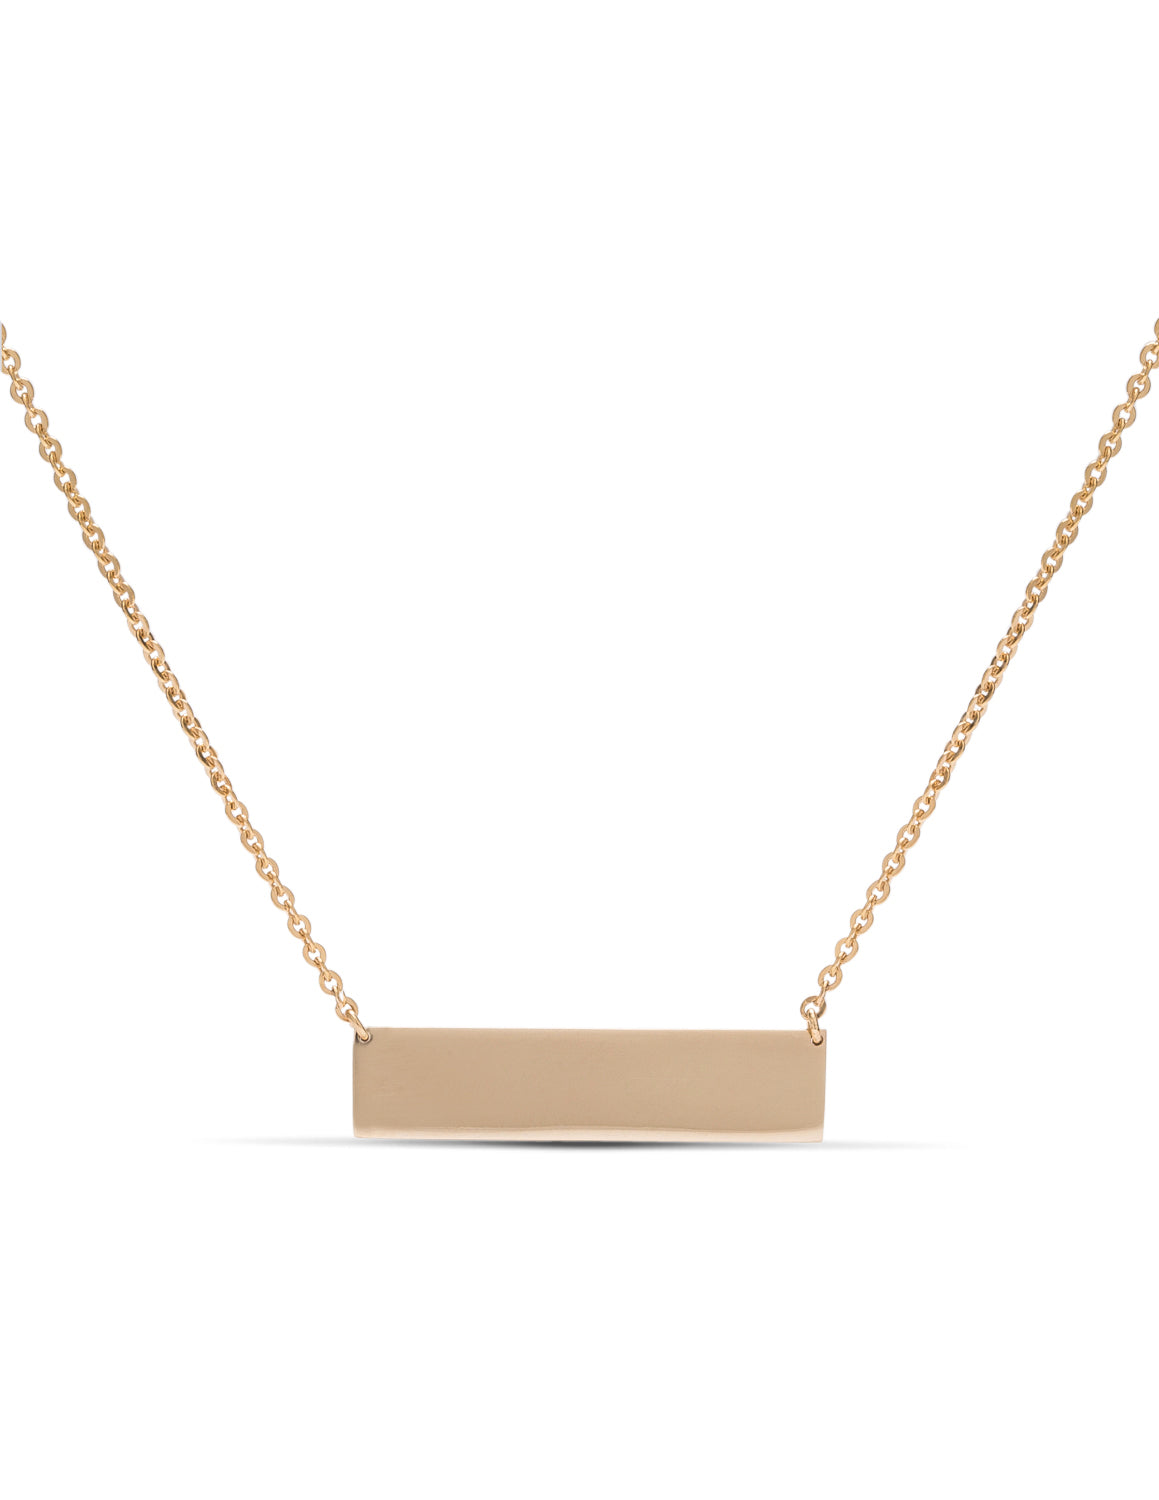 Yellow Gold Bar Necklace - Charles Koll Jewellers